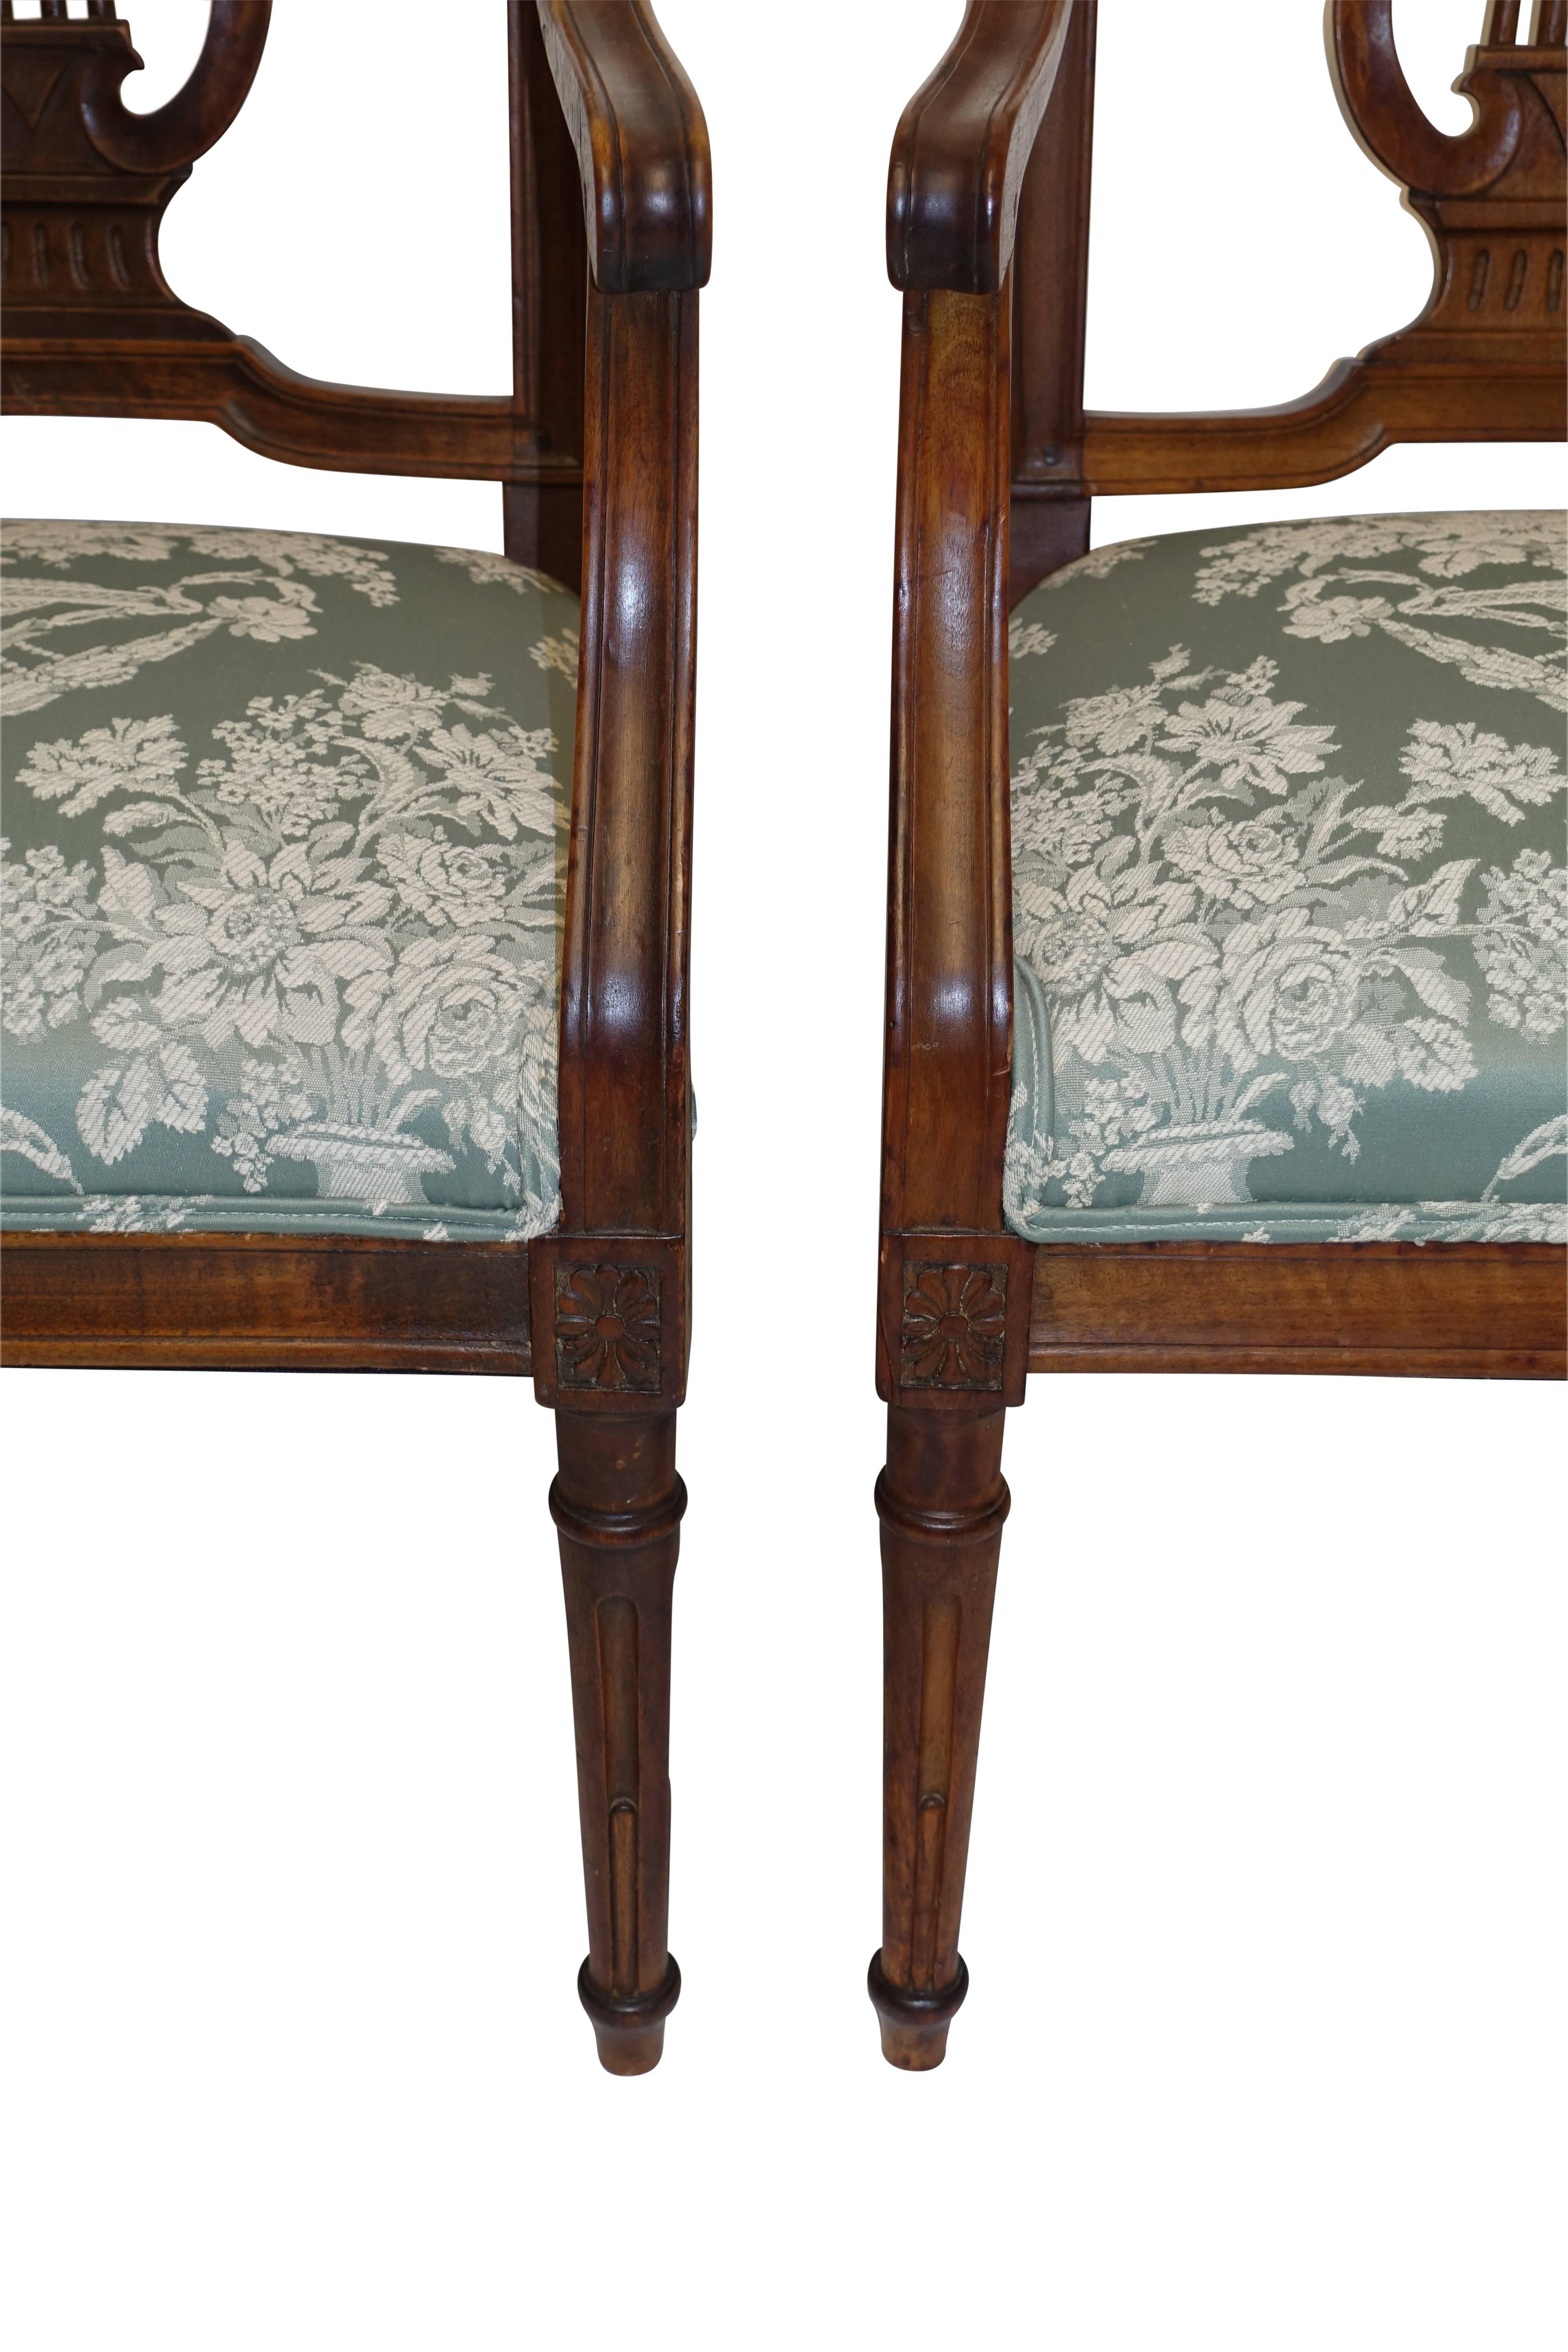 Pair of Neoclassical Walnut Armchairs, Italy, 18th Century In Excellent Condition For Sale In San Francisco, CA